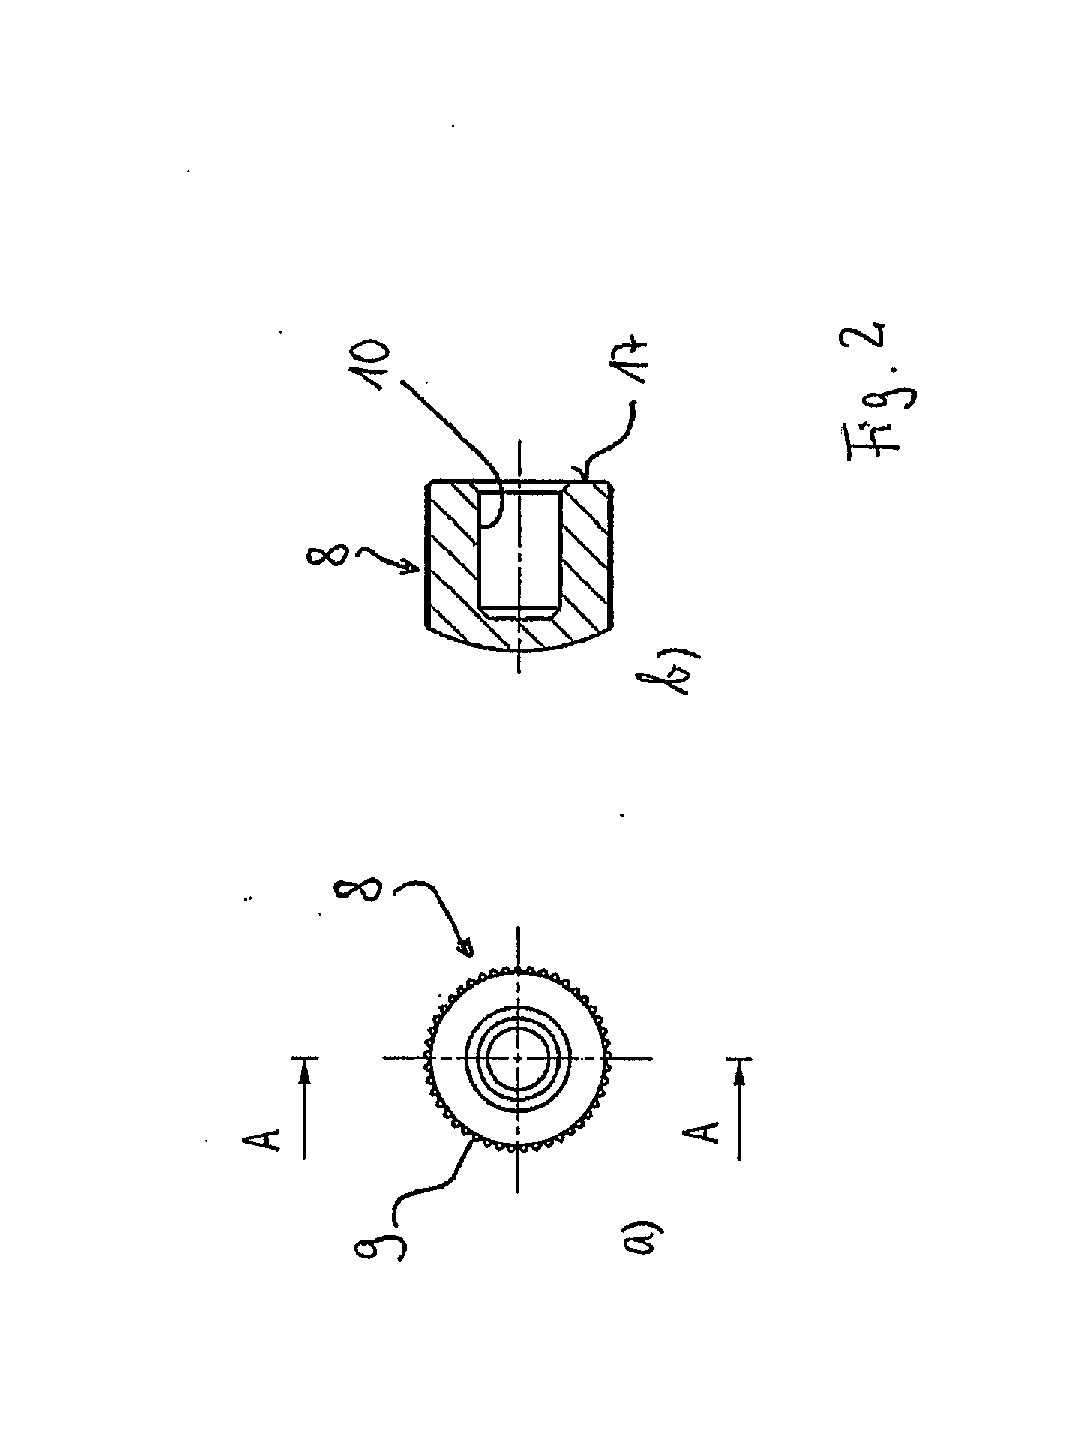 Tuning peg for a stringed instrument